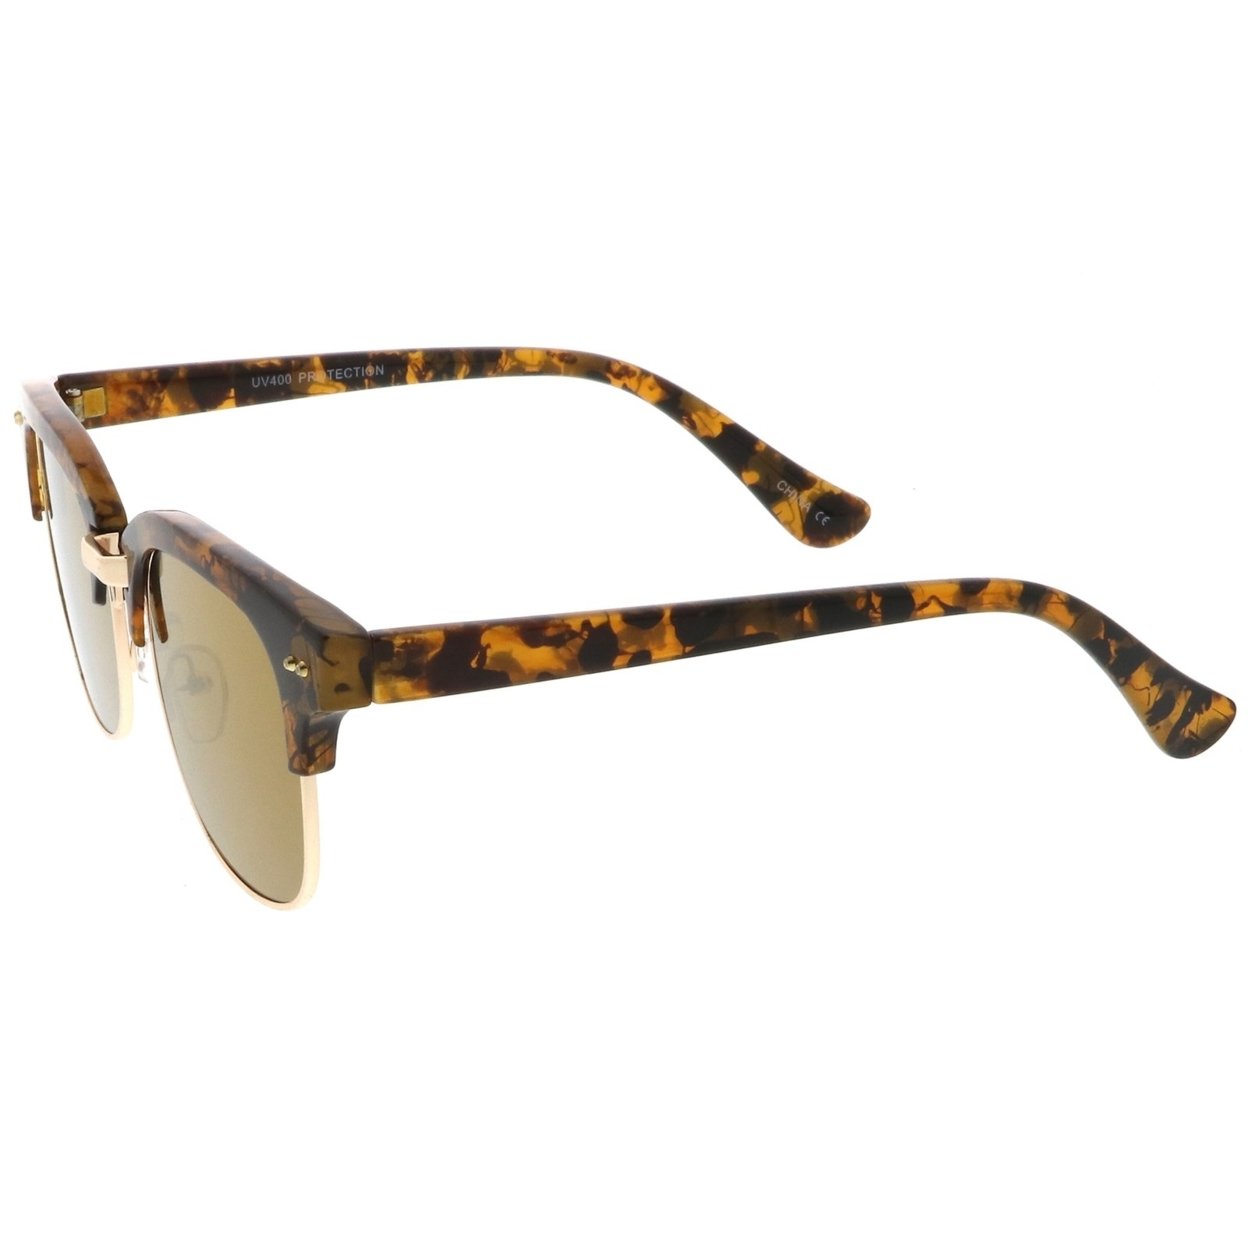 Modern Marble Print Horn Rimmed Mirrored Square Flat Lens Half Frame Sunglasses 51mm - Pink-Gold / Pink-Green Mirror